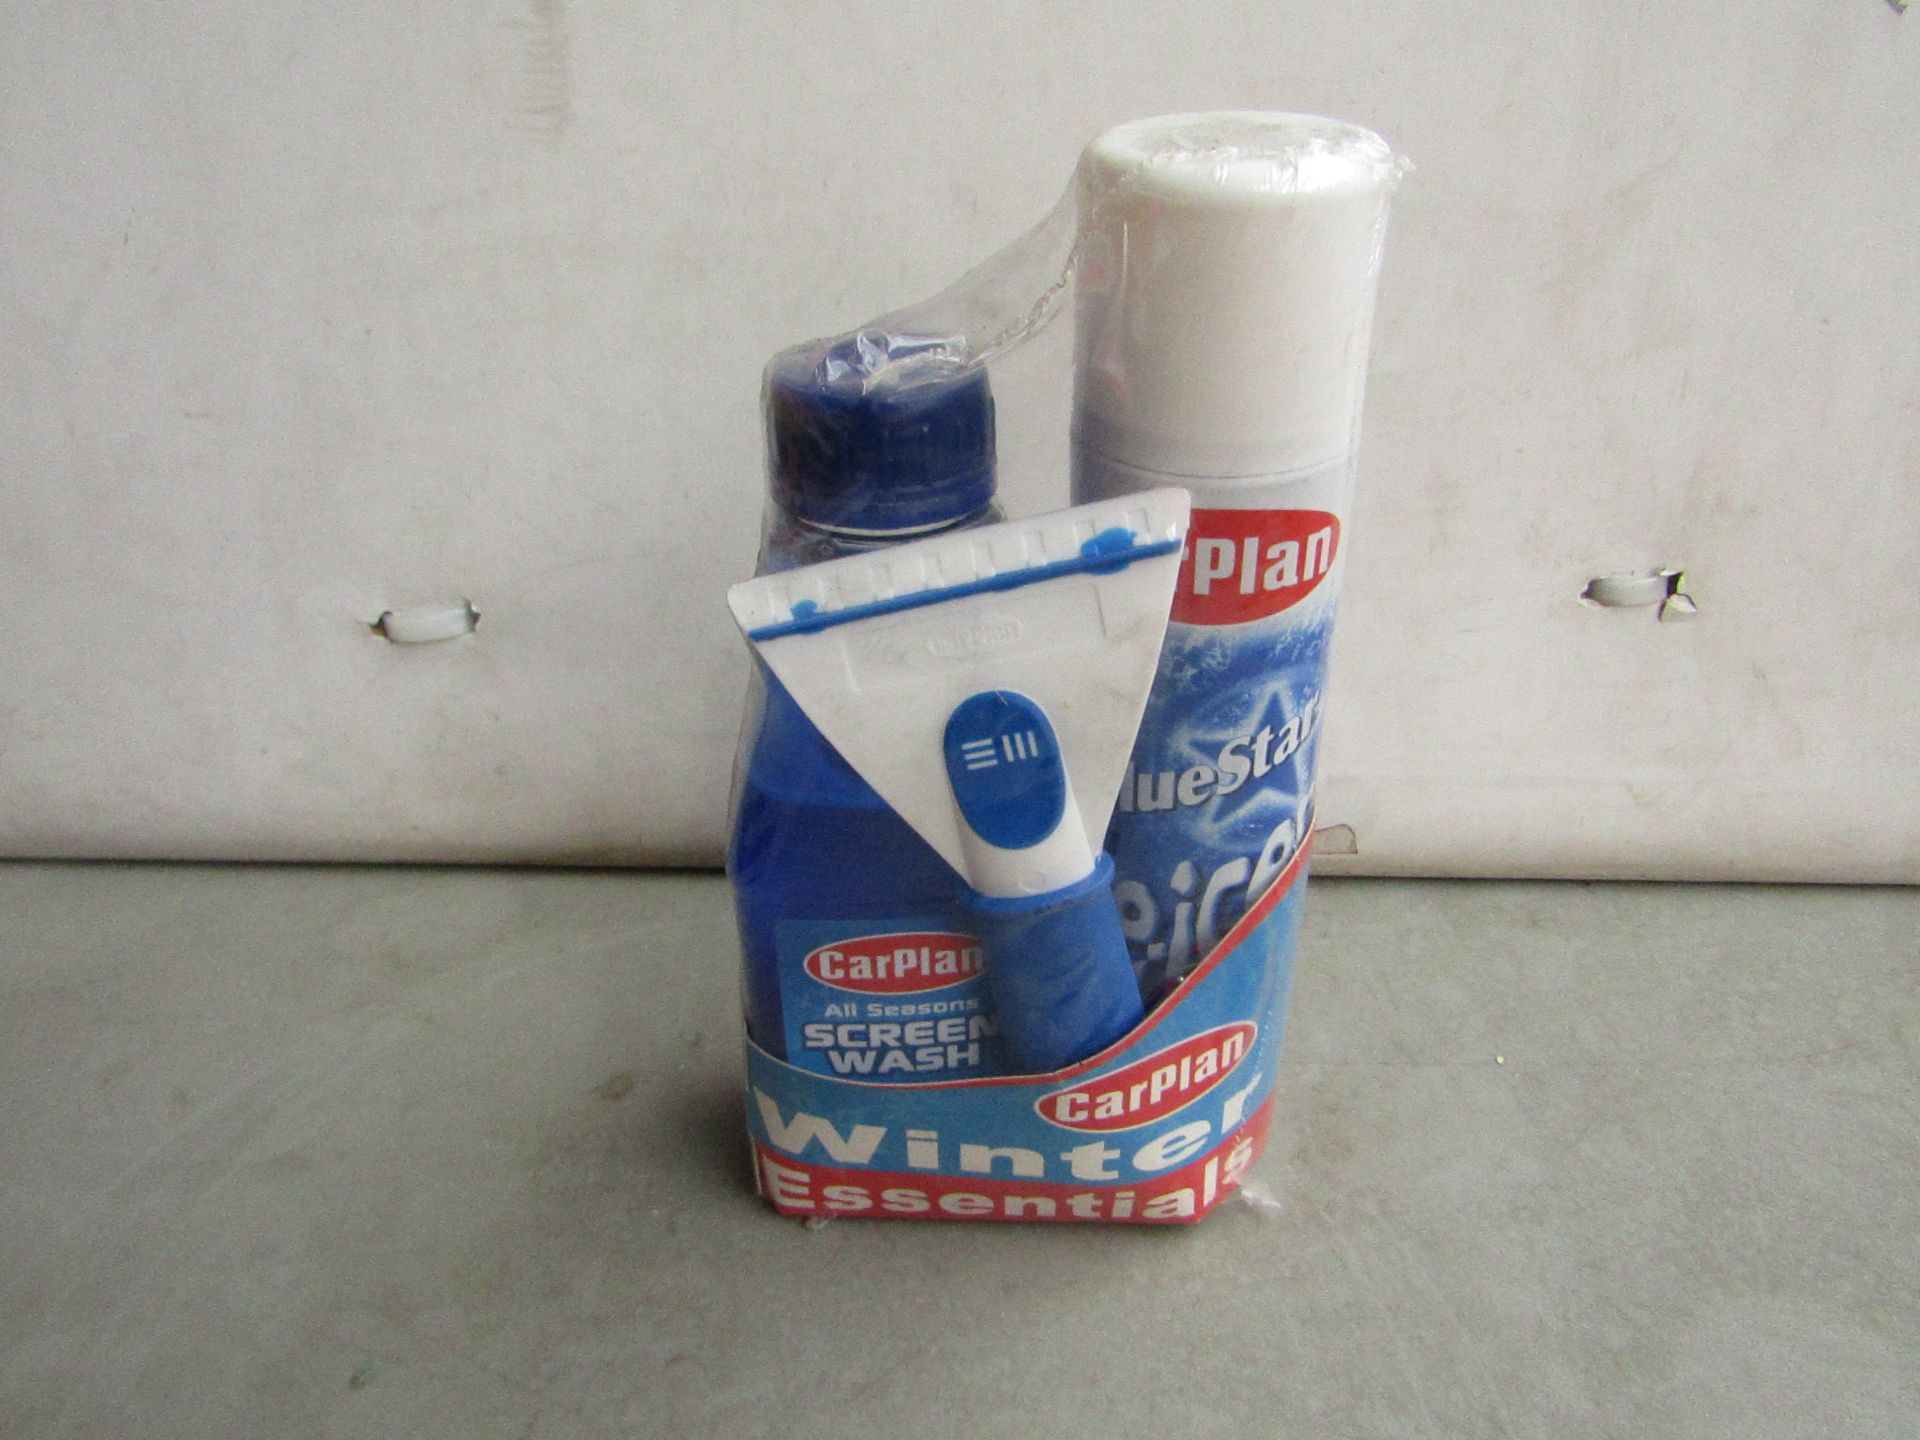 Carplan - Winter Clear Screen Pack - Contains : 1x De-icer 300ml. 1x Screnwash Concentrate 500ml. 1x